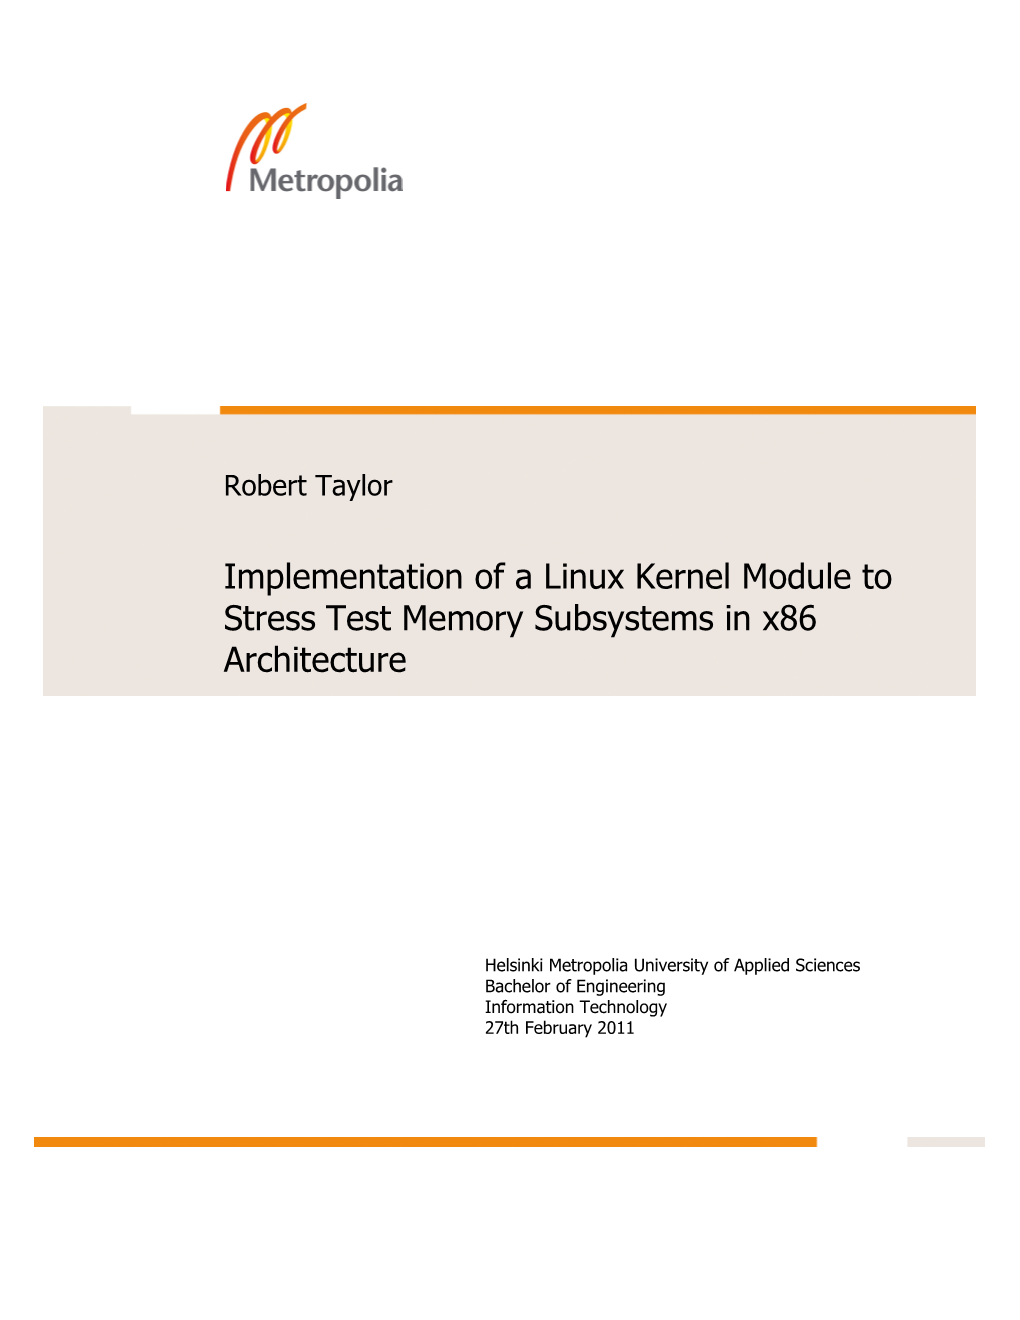 Implementation of a Linux Kernel Module to Stress Test Memory Subsystems in X86 Architecture